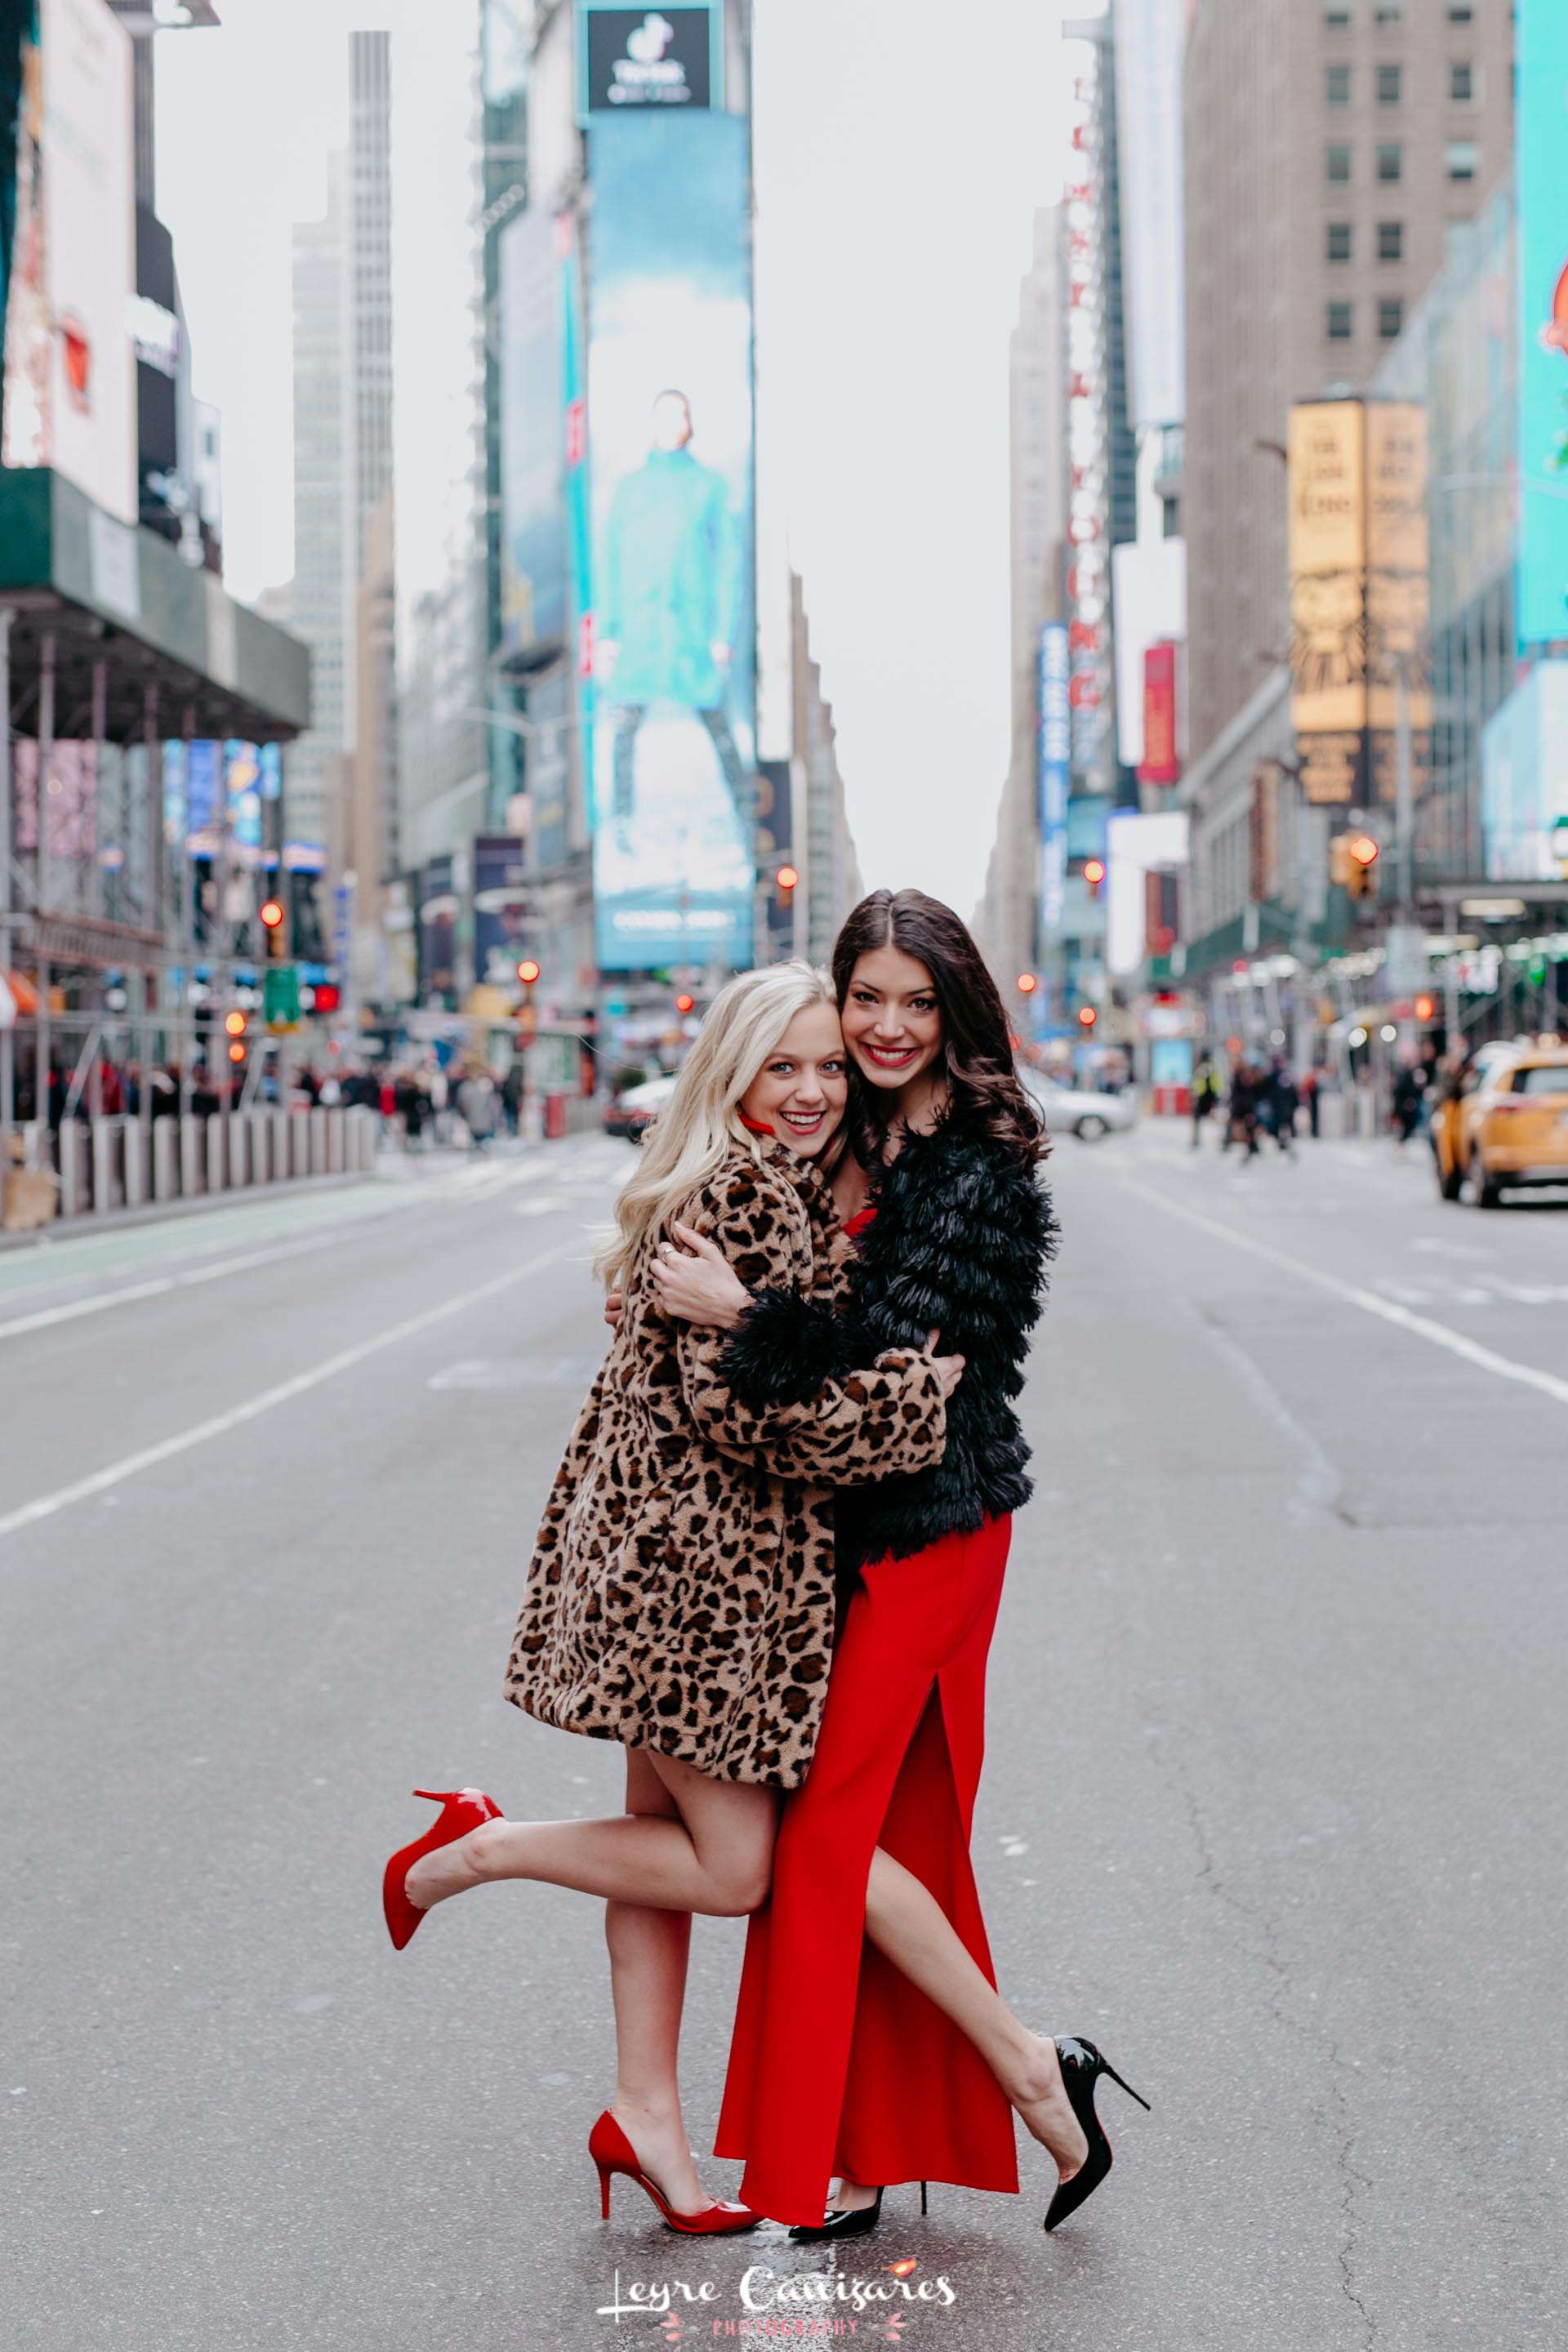 friends photo session in times square, nyc